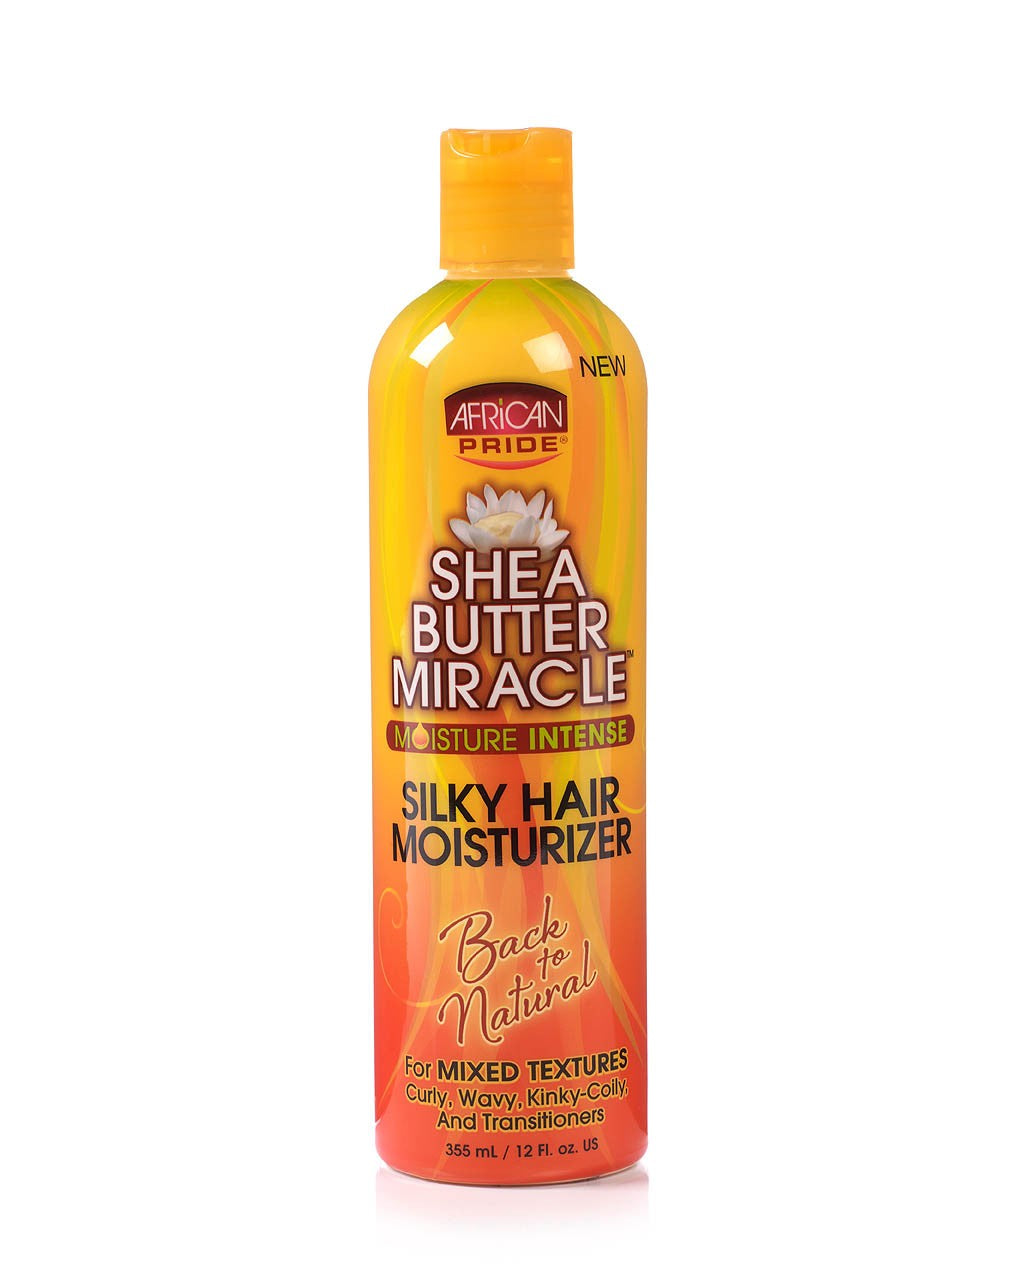 African Pride Shea Butter Miracle Silky Hair Moisturizer - 12Oz